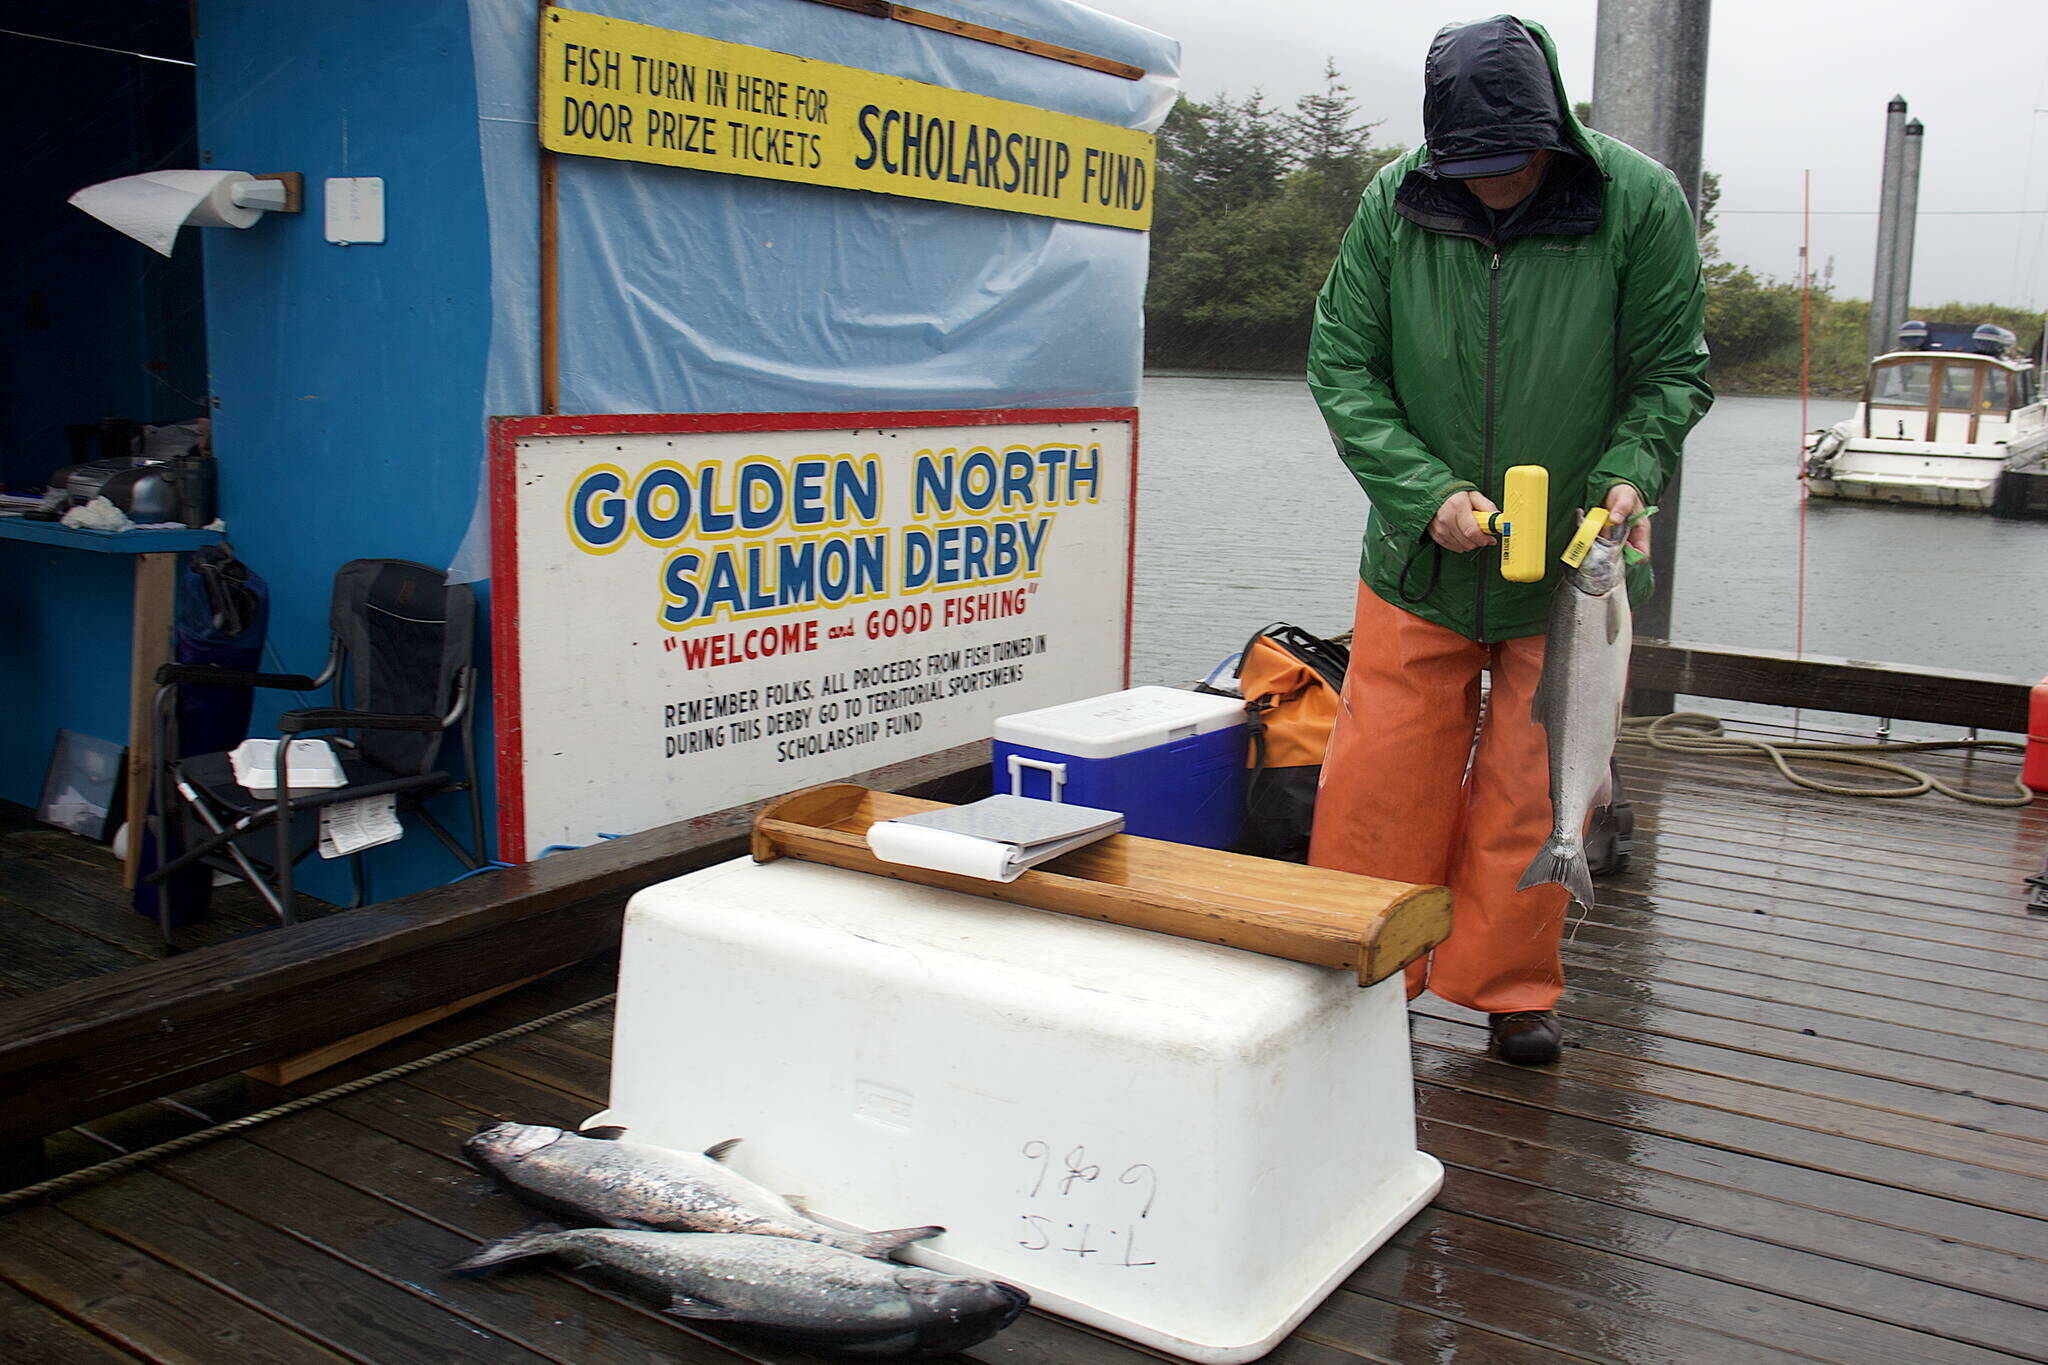 Mike Jaenicke, a dock sampler for the Alaska Department of Fish and Game, scans a tagged fish at the Douglas Harbor station during the 77th annual Golden North Salmon Derby on Saturday. (Meredith Jordan / Juneau Empire)